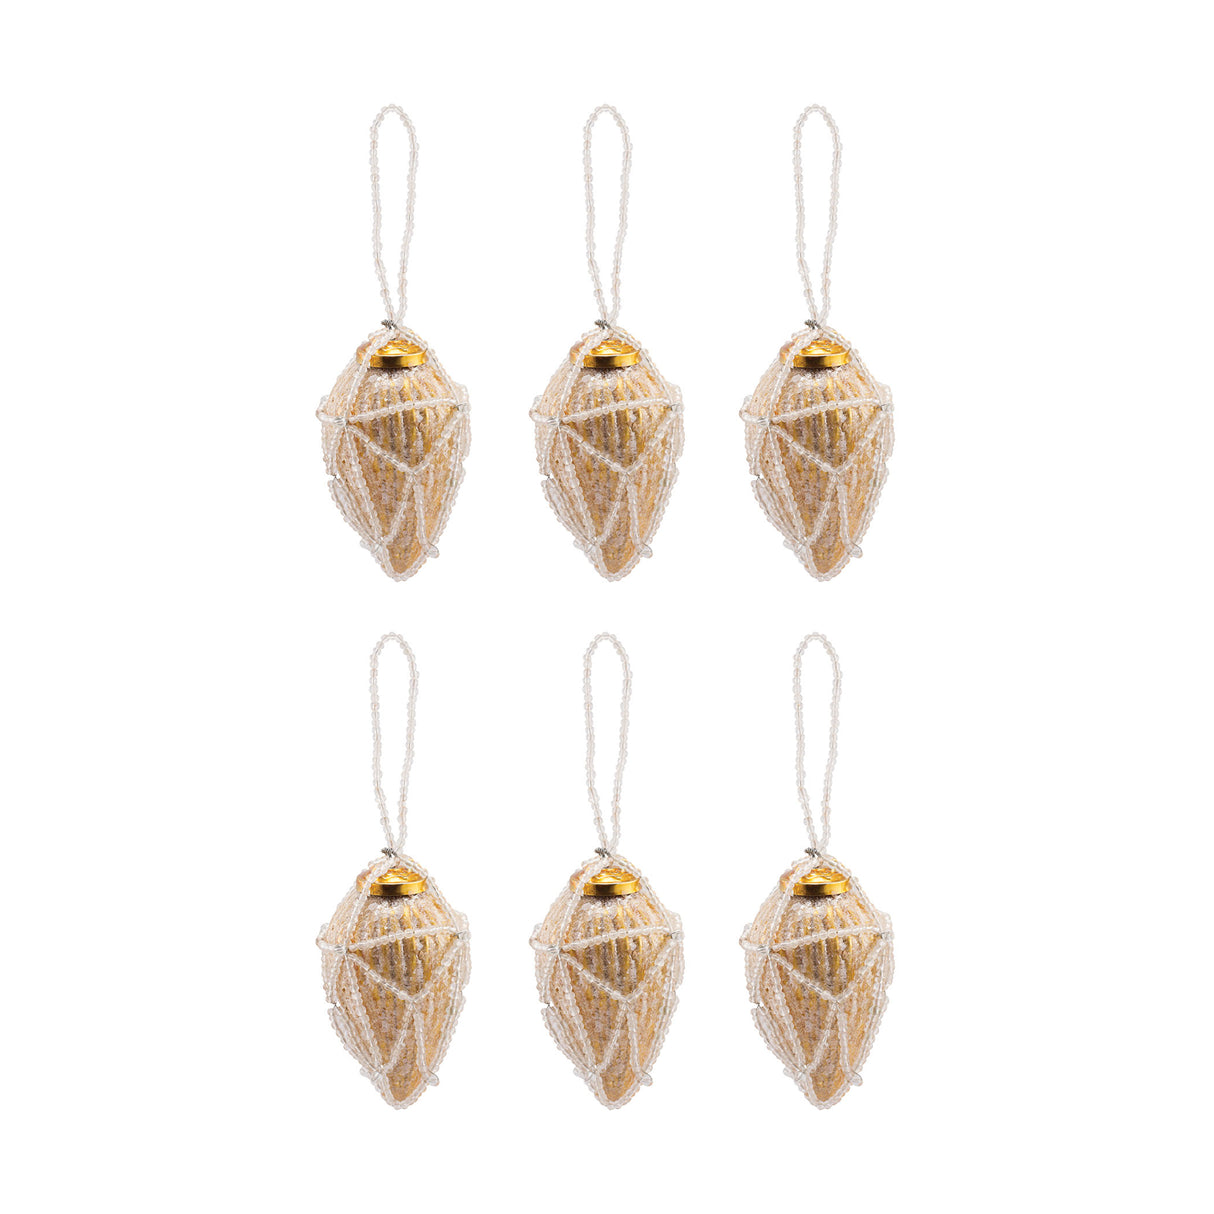 Elk 519277/S6 Beaded Ornament Conical (Set of 6)